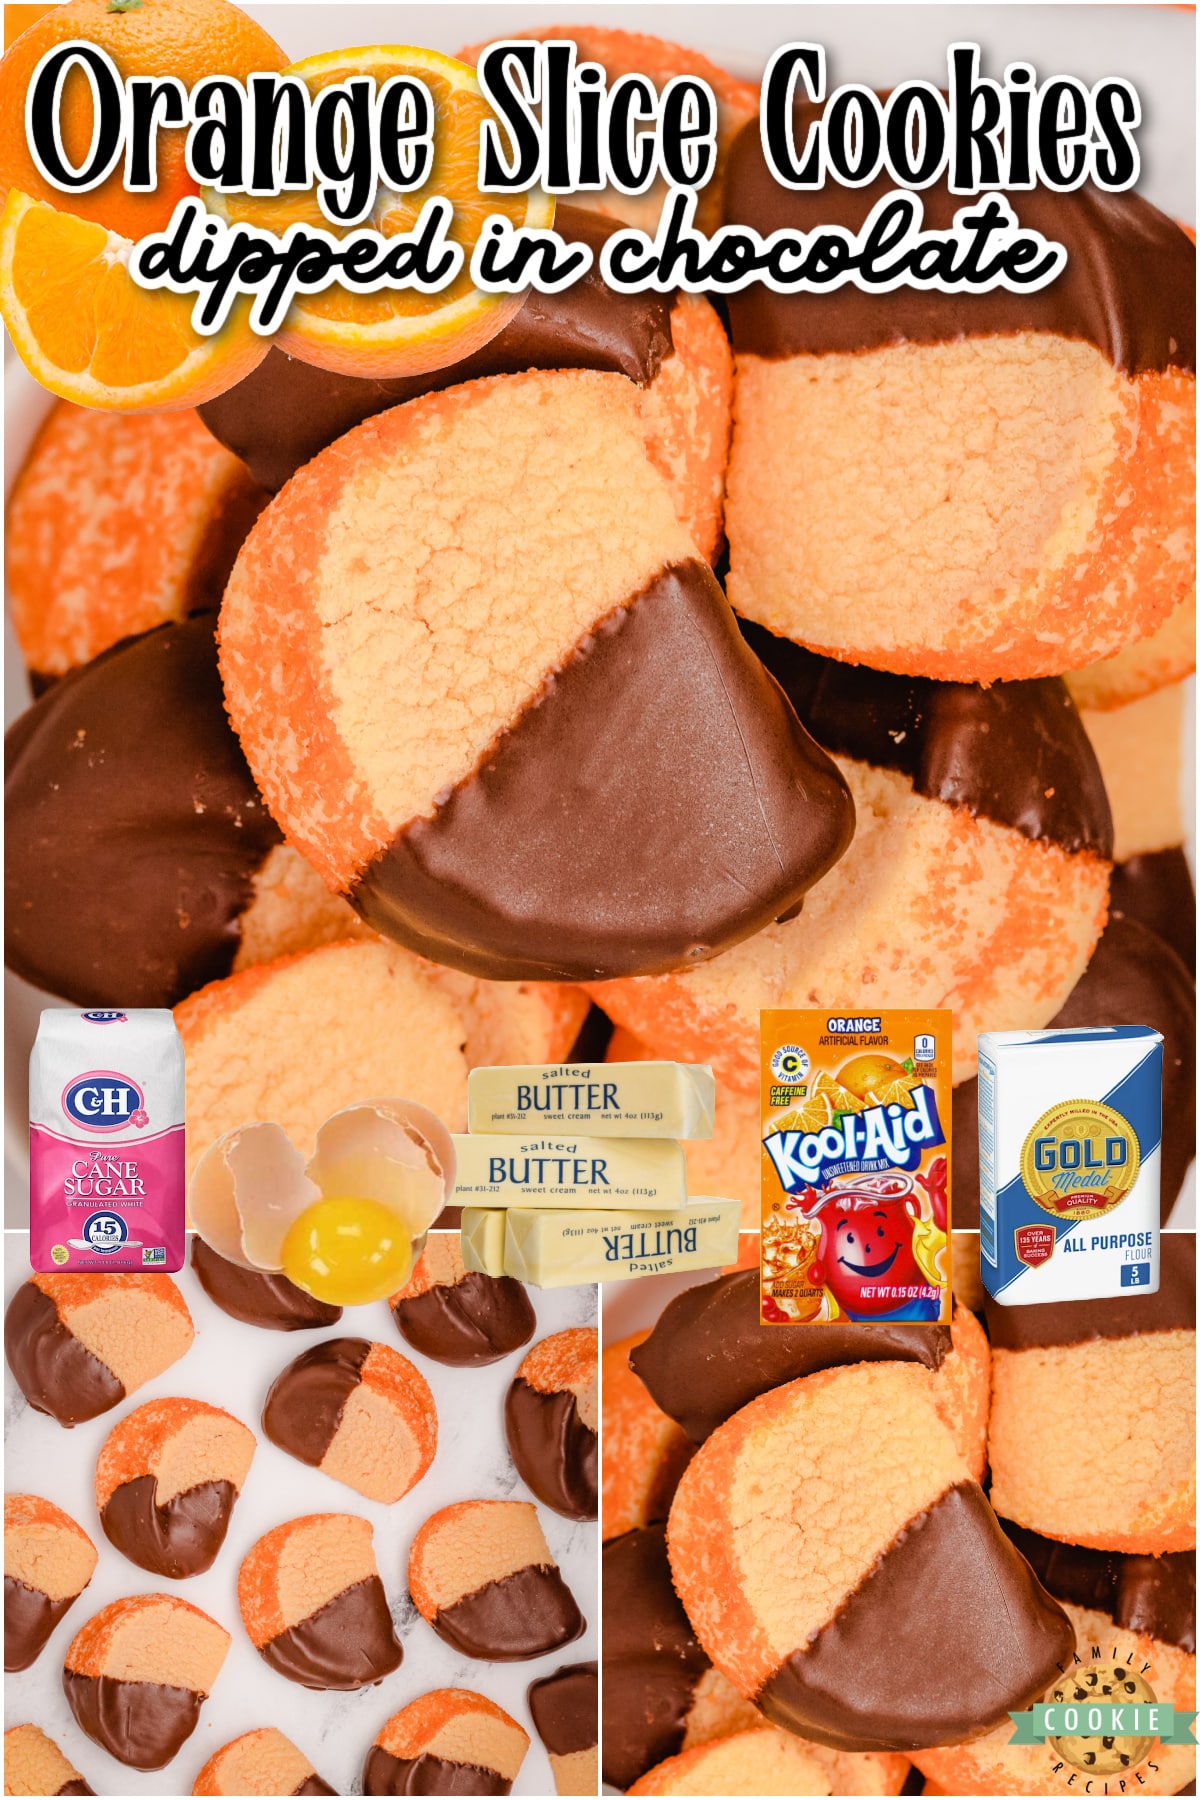 Chocolate Orange Slice Cookies mimic orange slices dipped in chocolate, their bright, tangy citrusy flavor comes from a orange Kool-Aid mix baked into the cookies! These orange slice cookies are a perfect cookie recipe for holiday treat exchanges during the holidays.